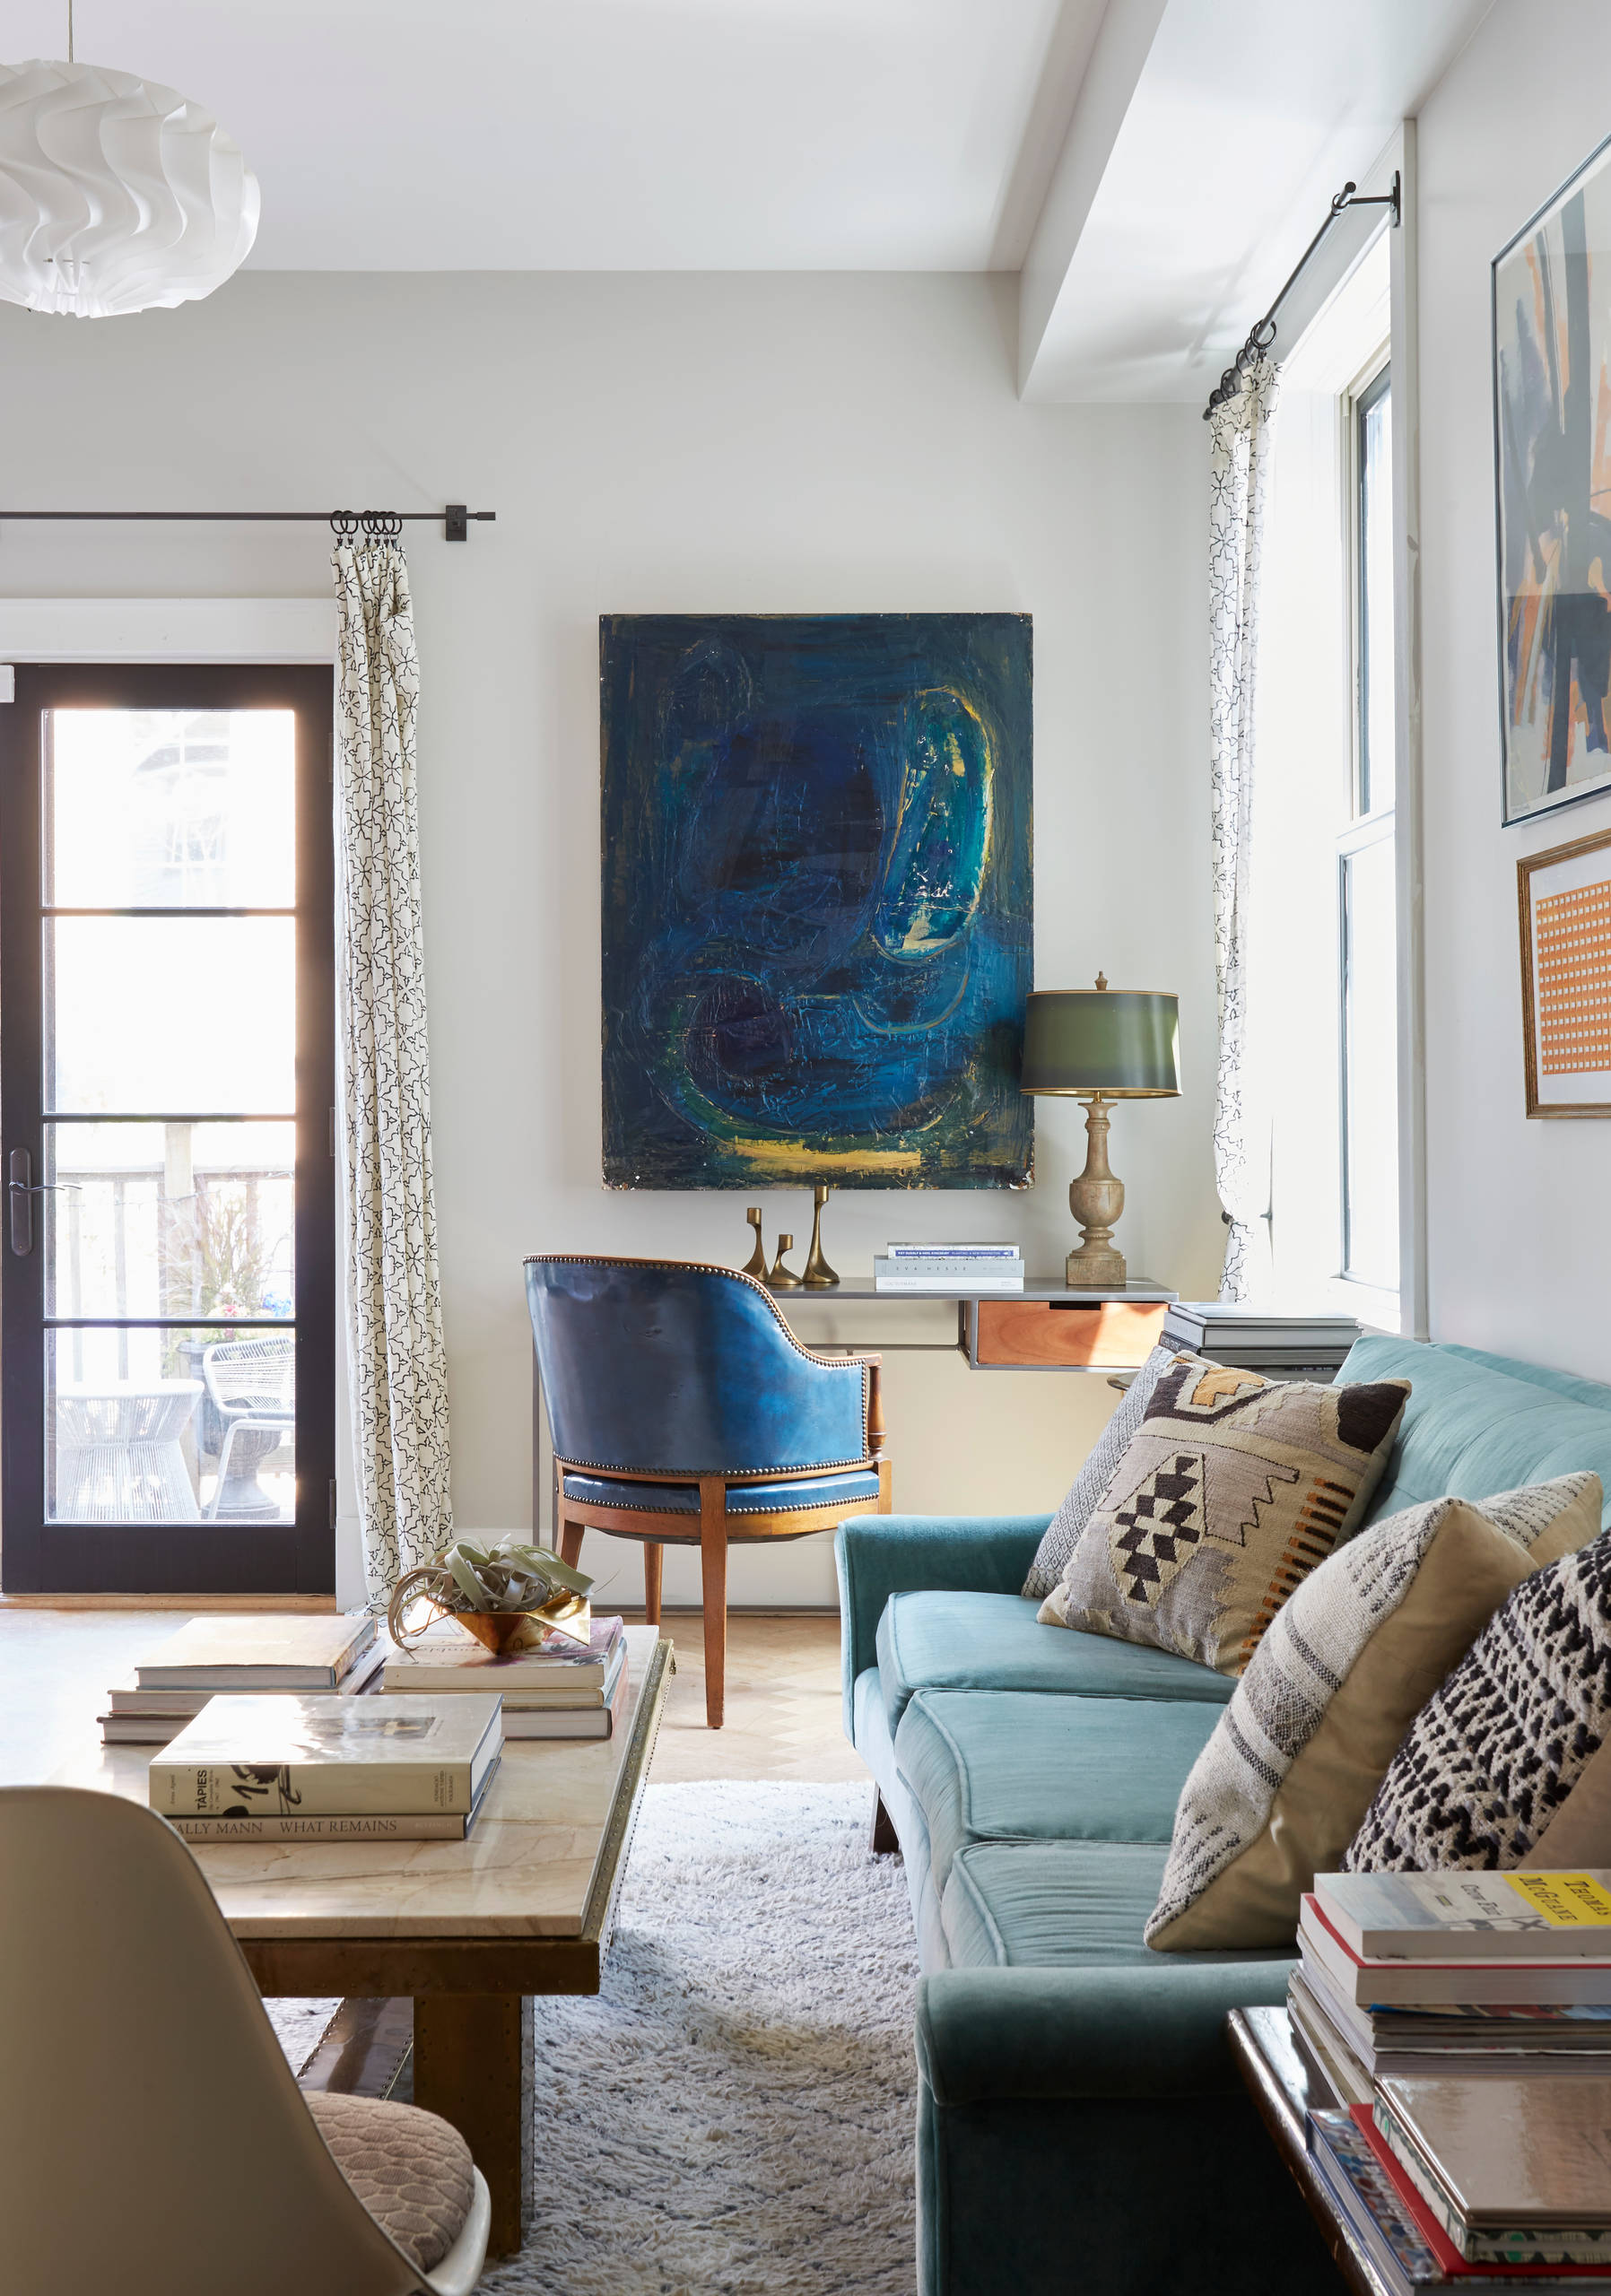 Our Chicago Coach House - Eclectic - Living Room - Chicago - by KitchenLab  Interiors | Houzz